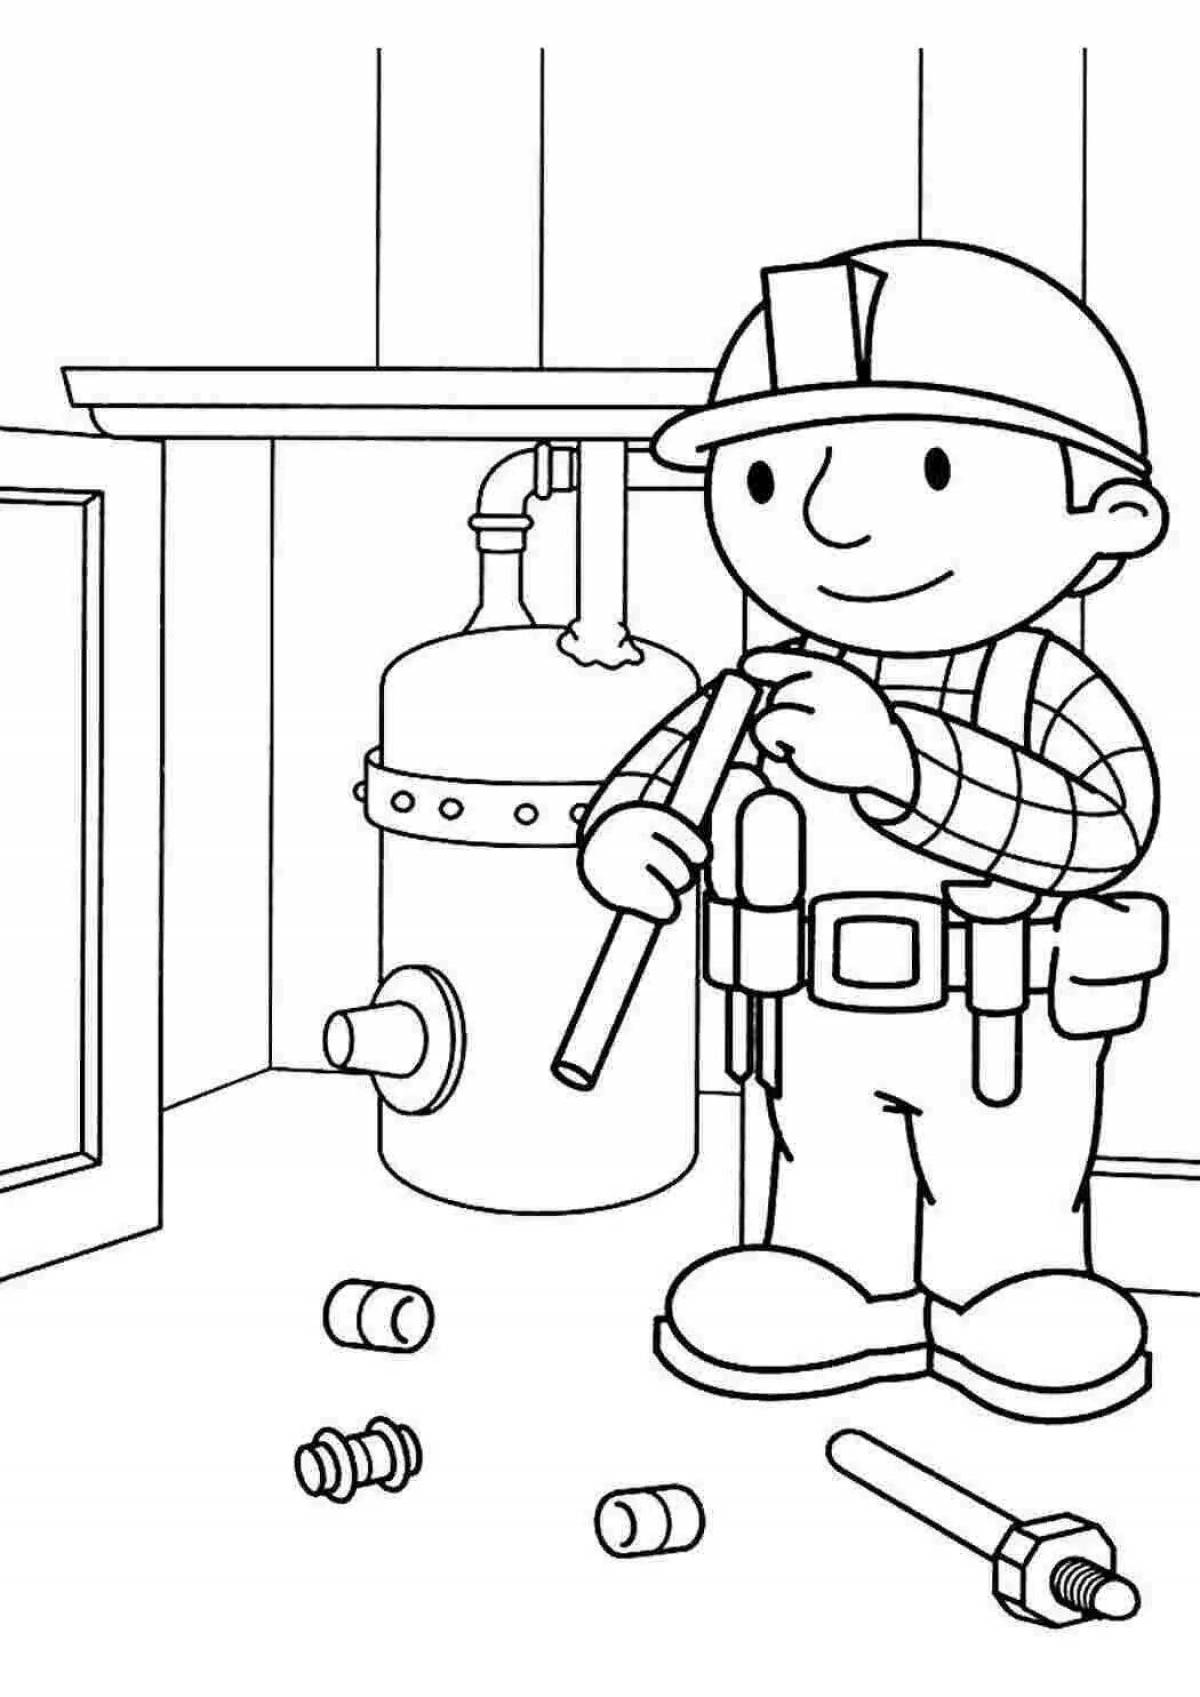 Sweet occupational safety through the eyes of children for preschoolers